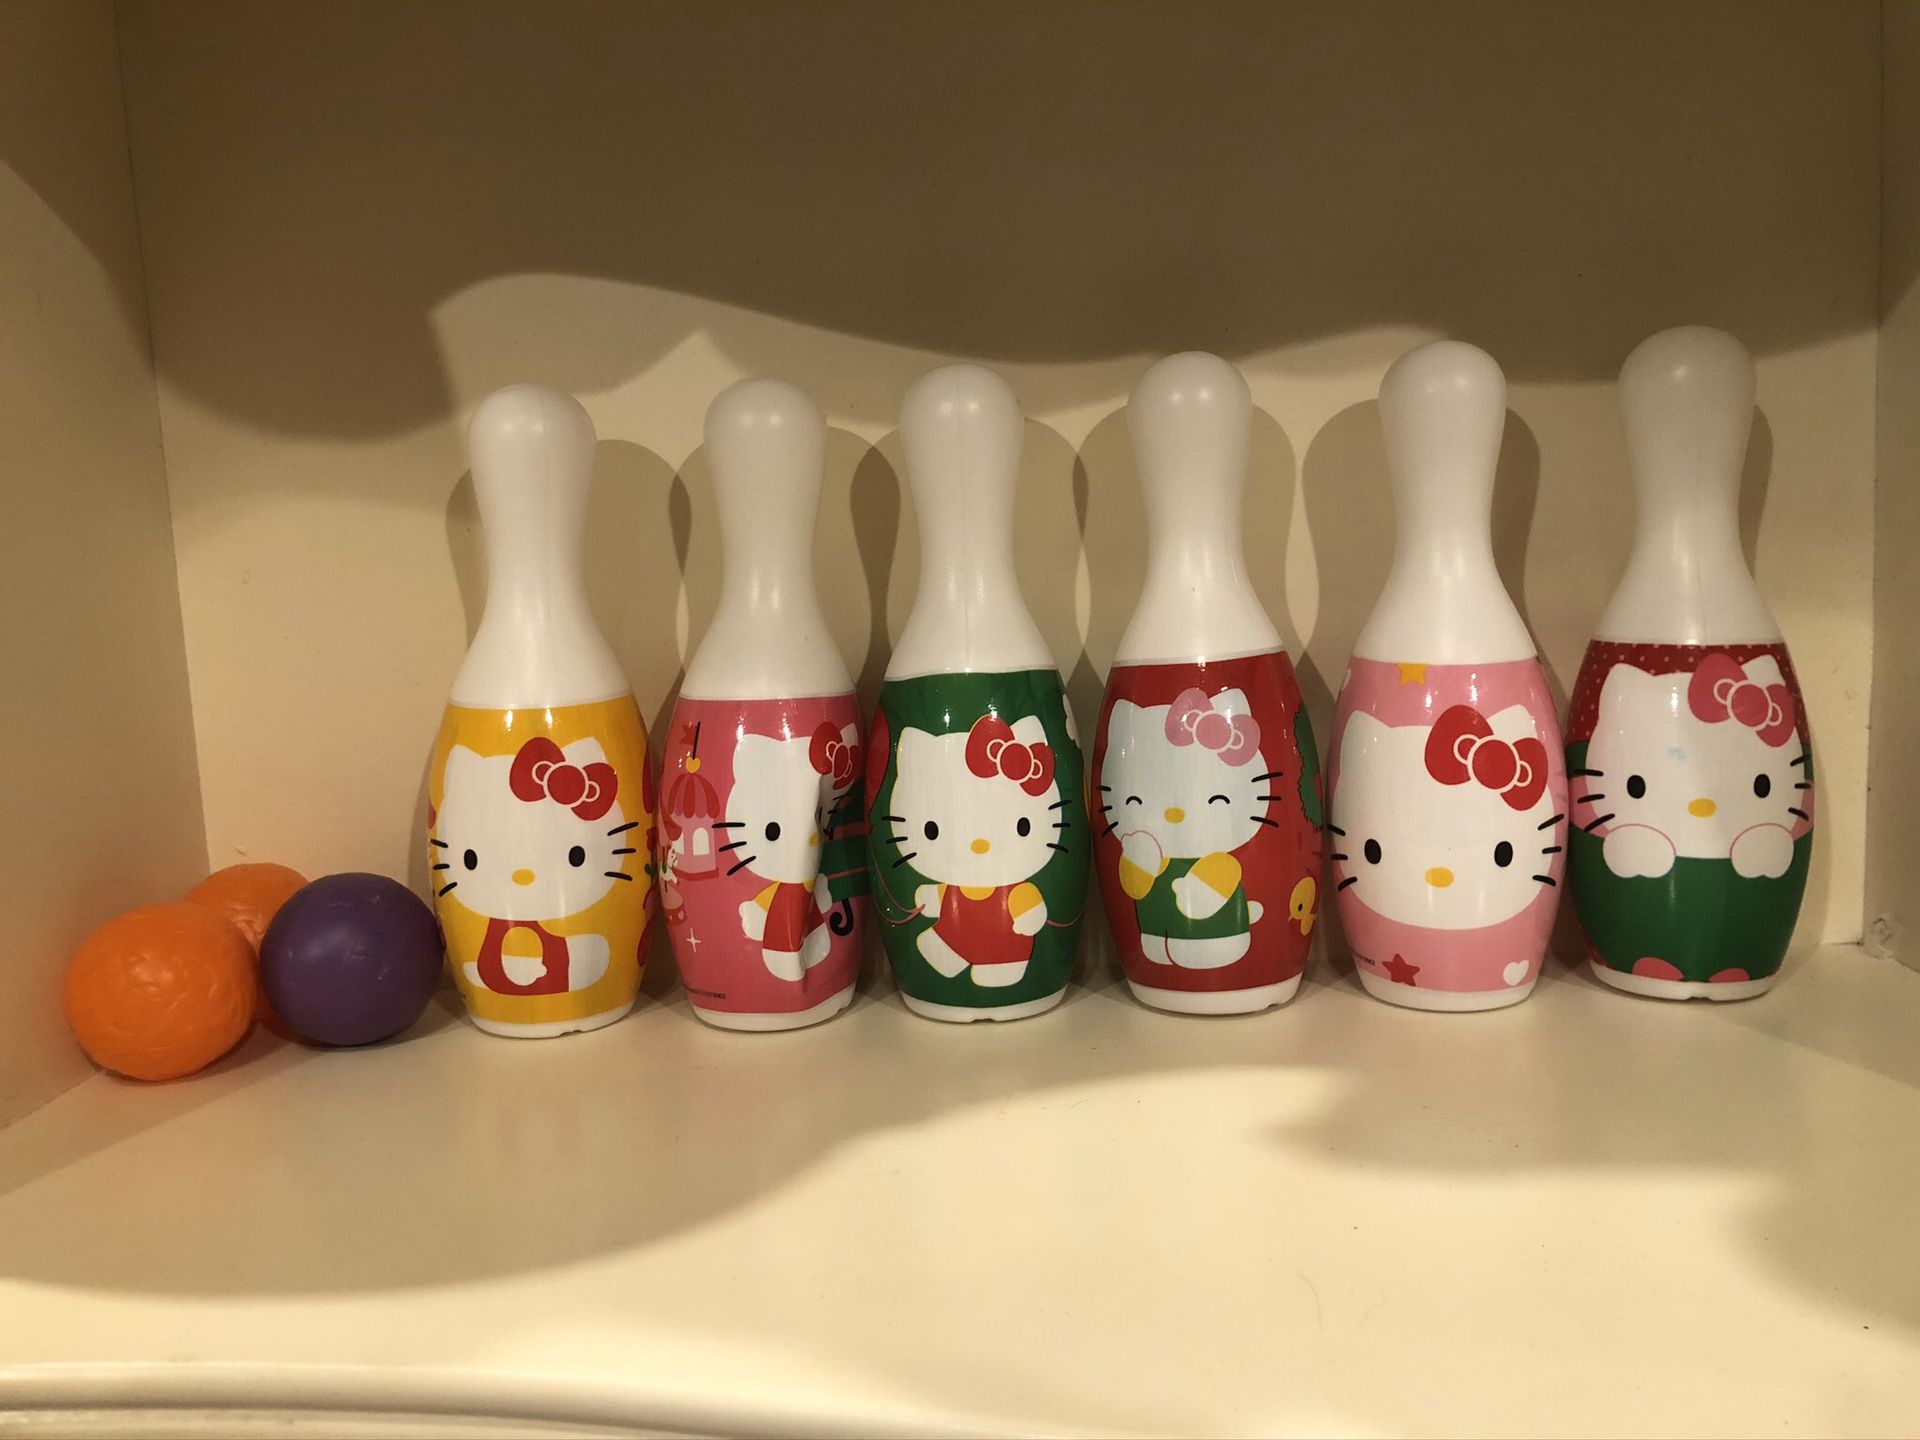 Hello Kitty Sanrio Bowling pins and balls - toy for kids! Free gift included!